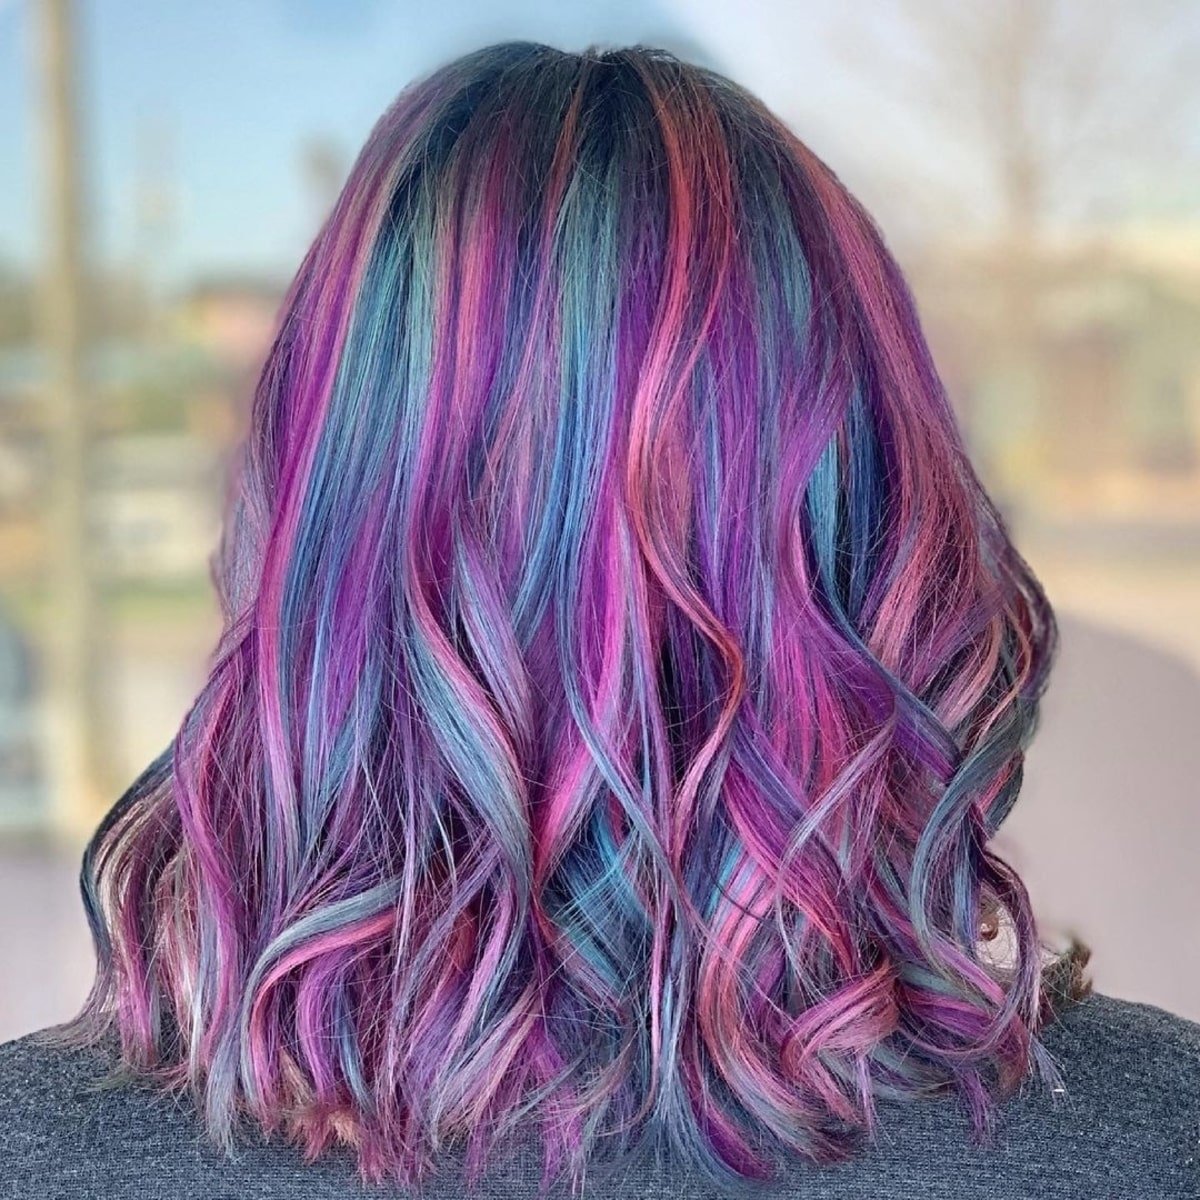 Light blue, pink and purple highlights